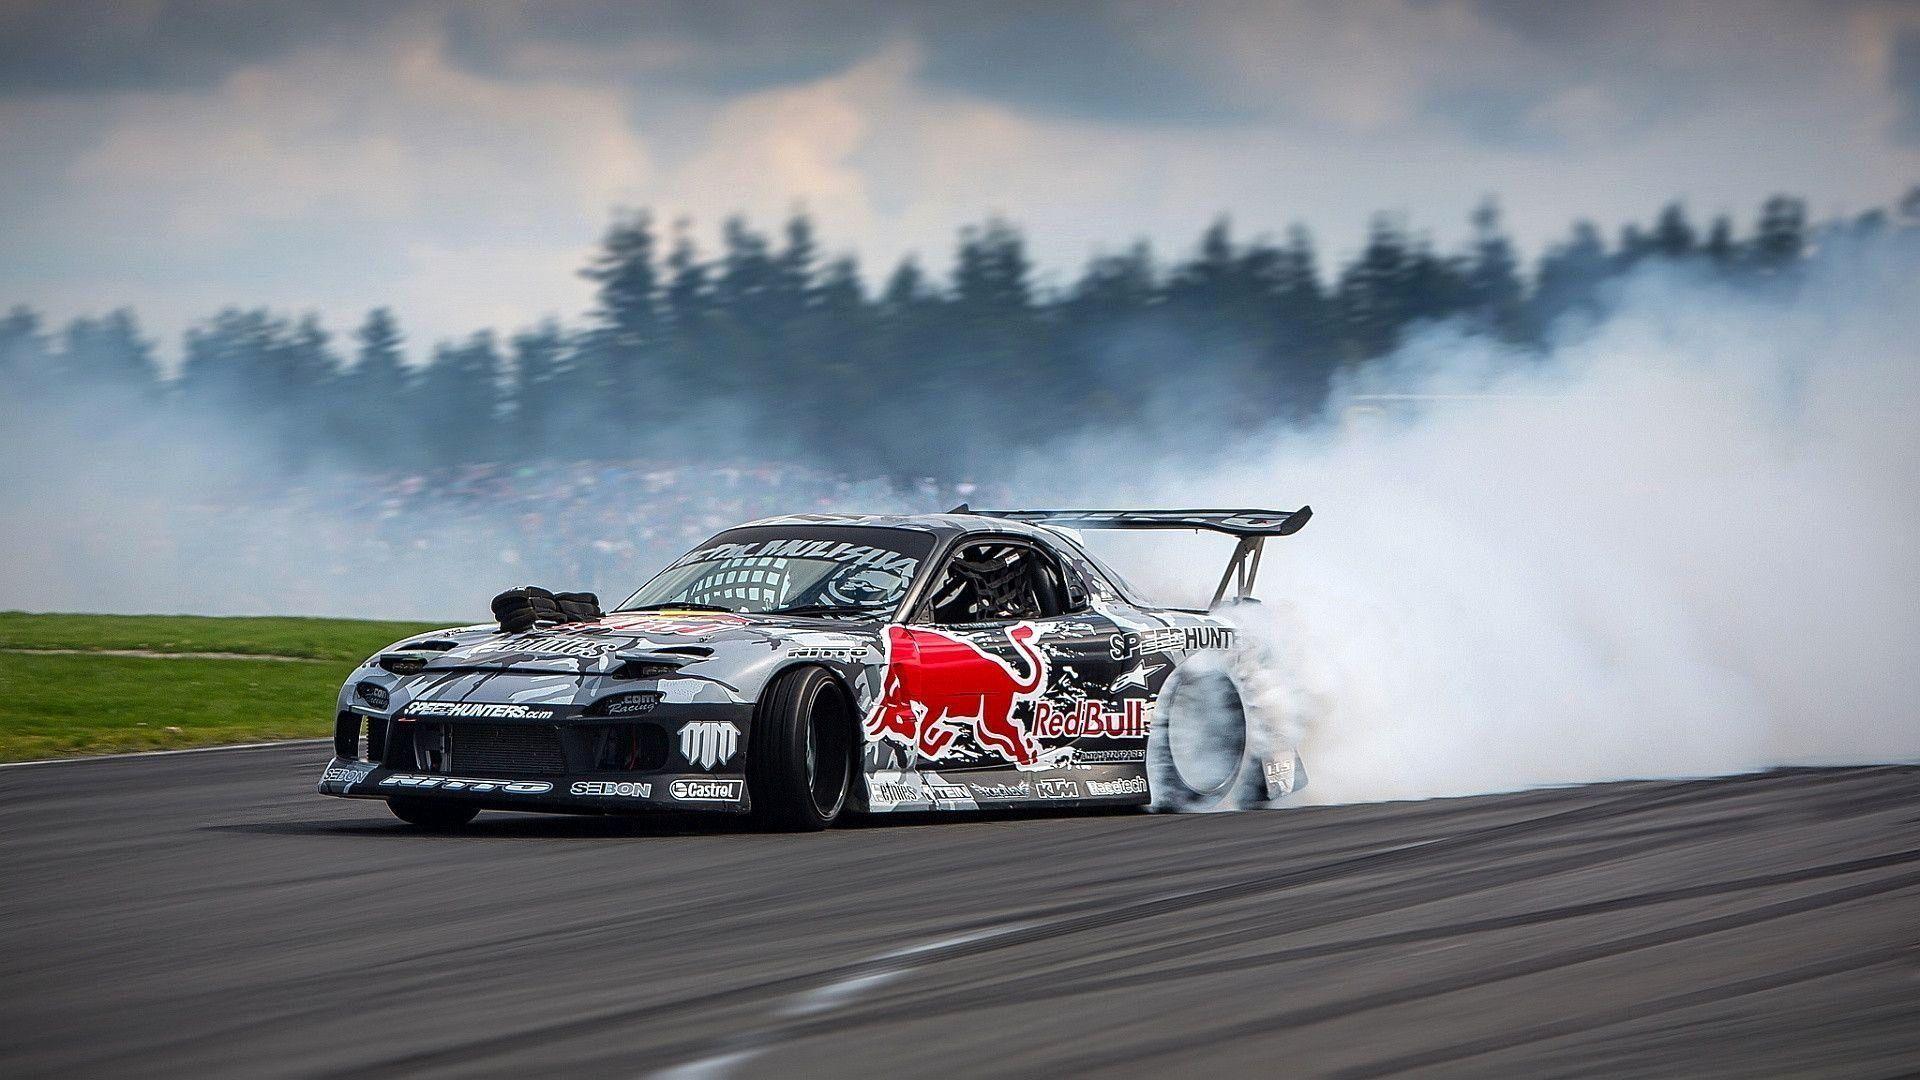 Awesome Car Drifting Wallpapers - Top Free Awesome Car Drifting